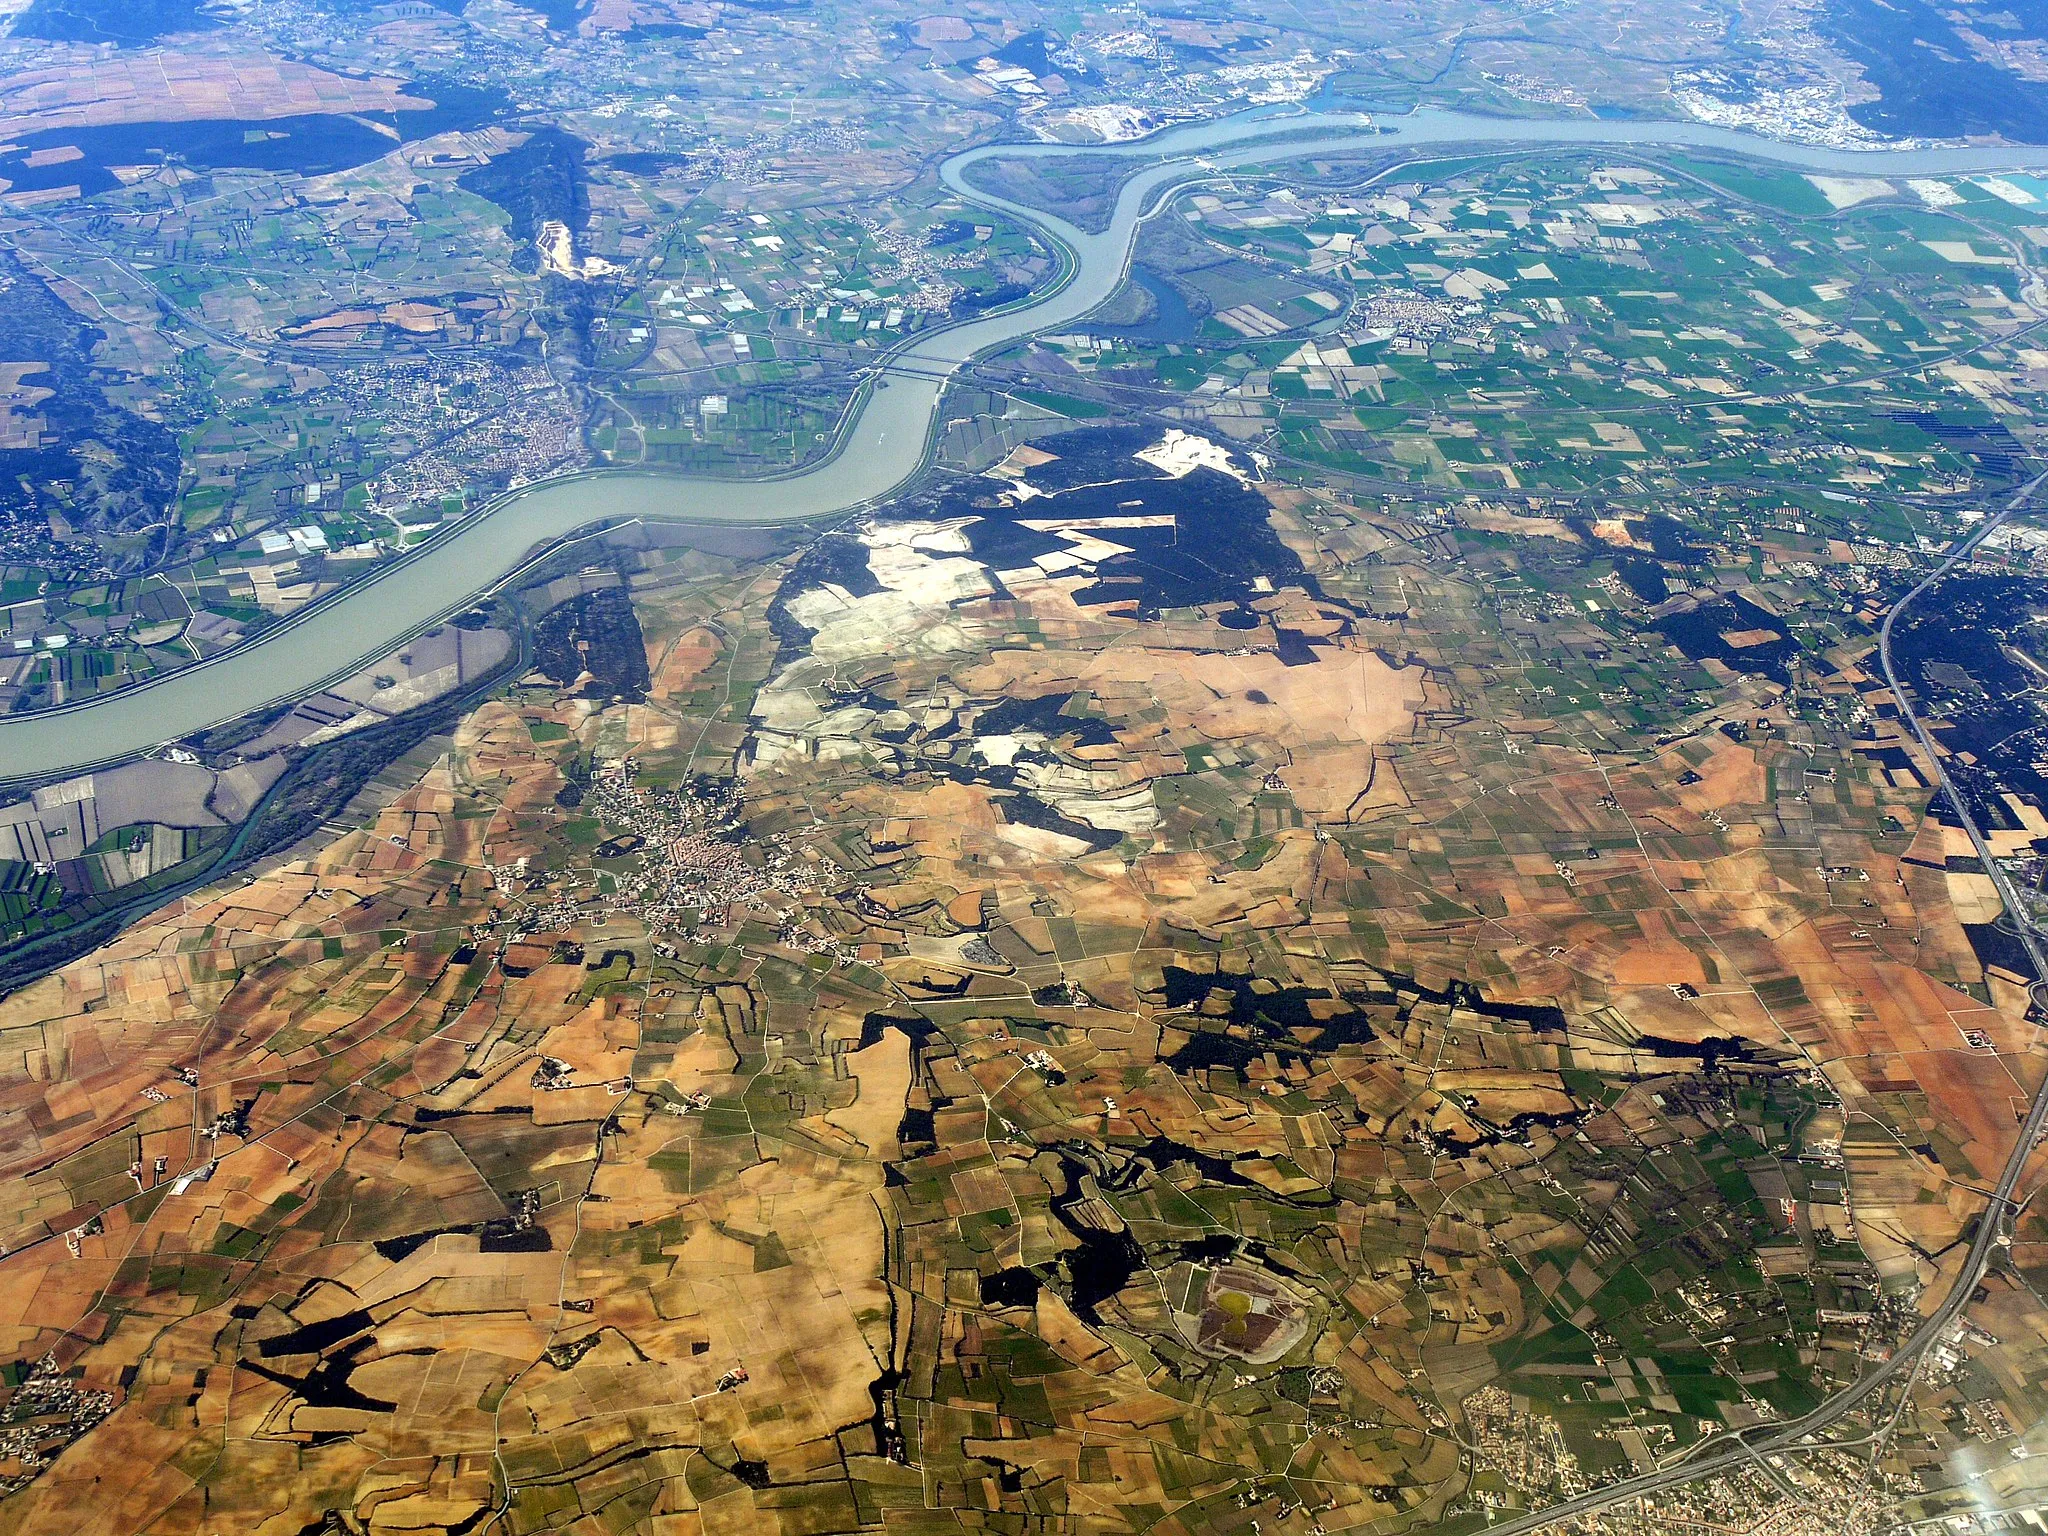 Photo showing: Châteauneuf-du-pape and Courthézon, photograph taken from the sky, on the fly line between Marseille and Stockholm.